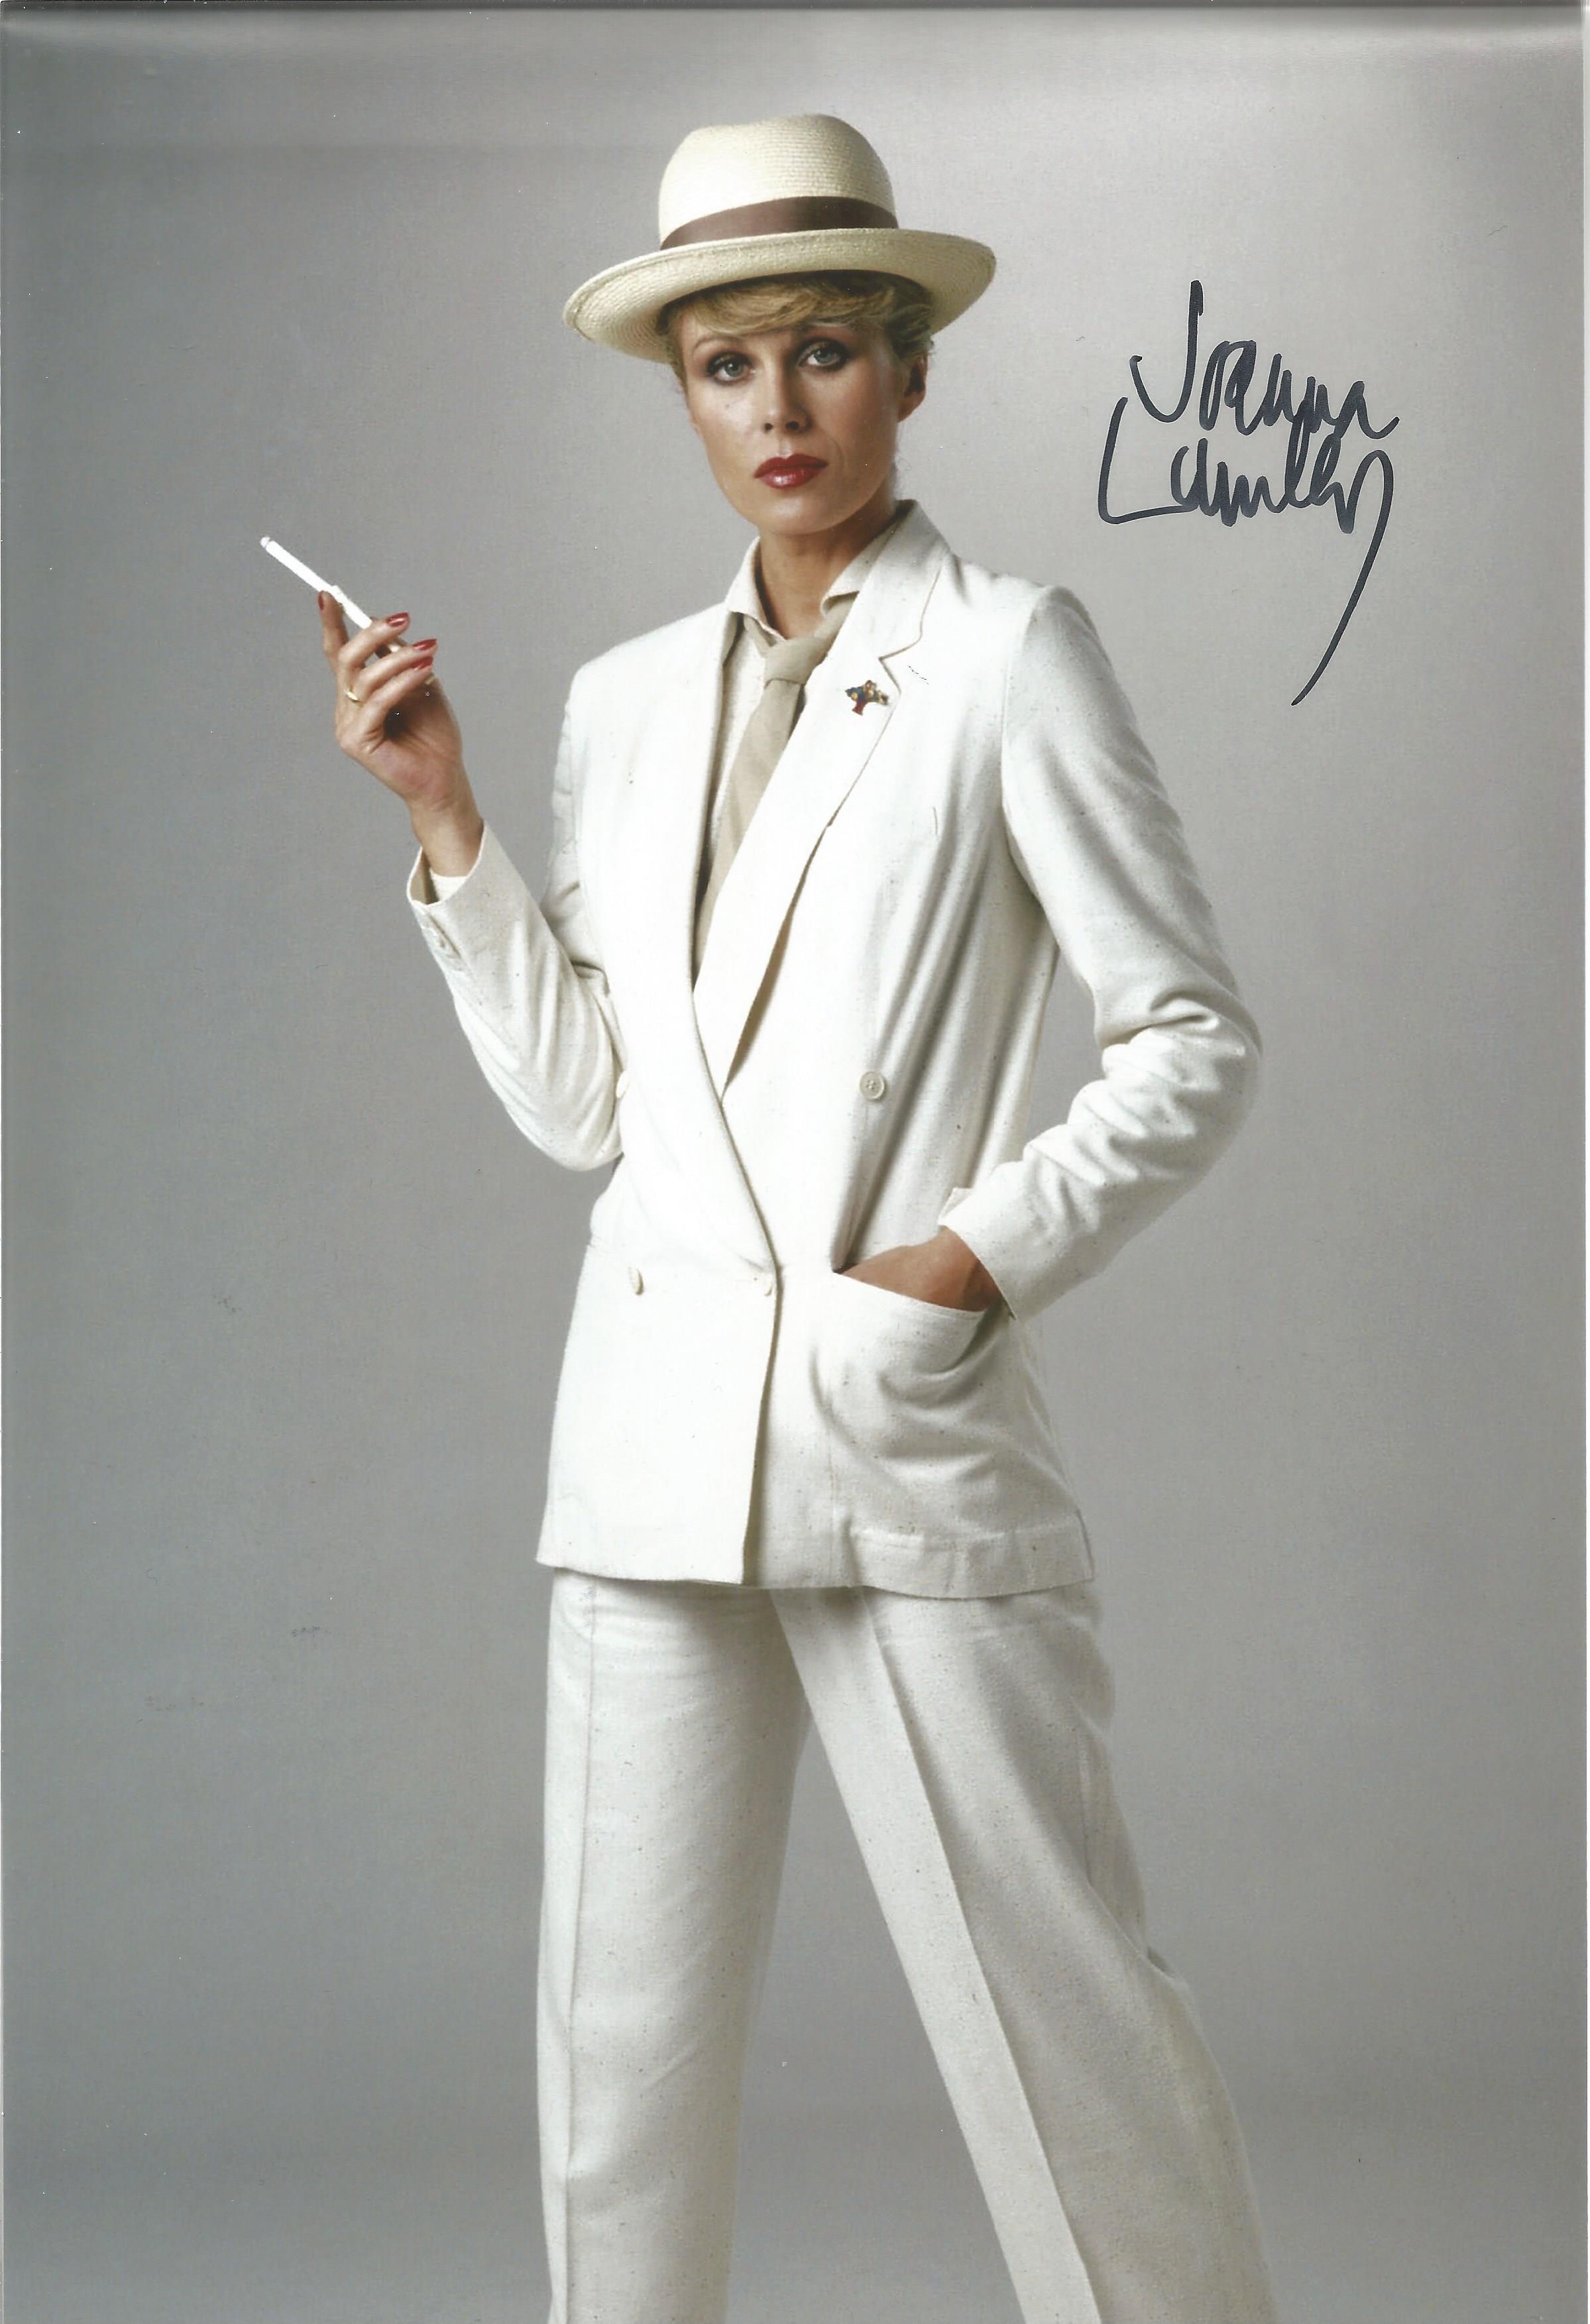 Joanna Lumley Actress Signed 8x12 Photo. Good condition. All autographs come with a Certificate of